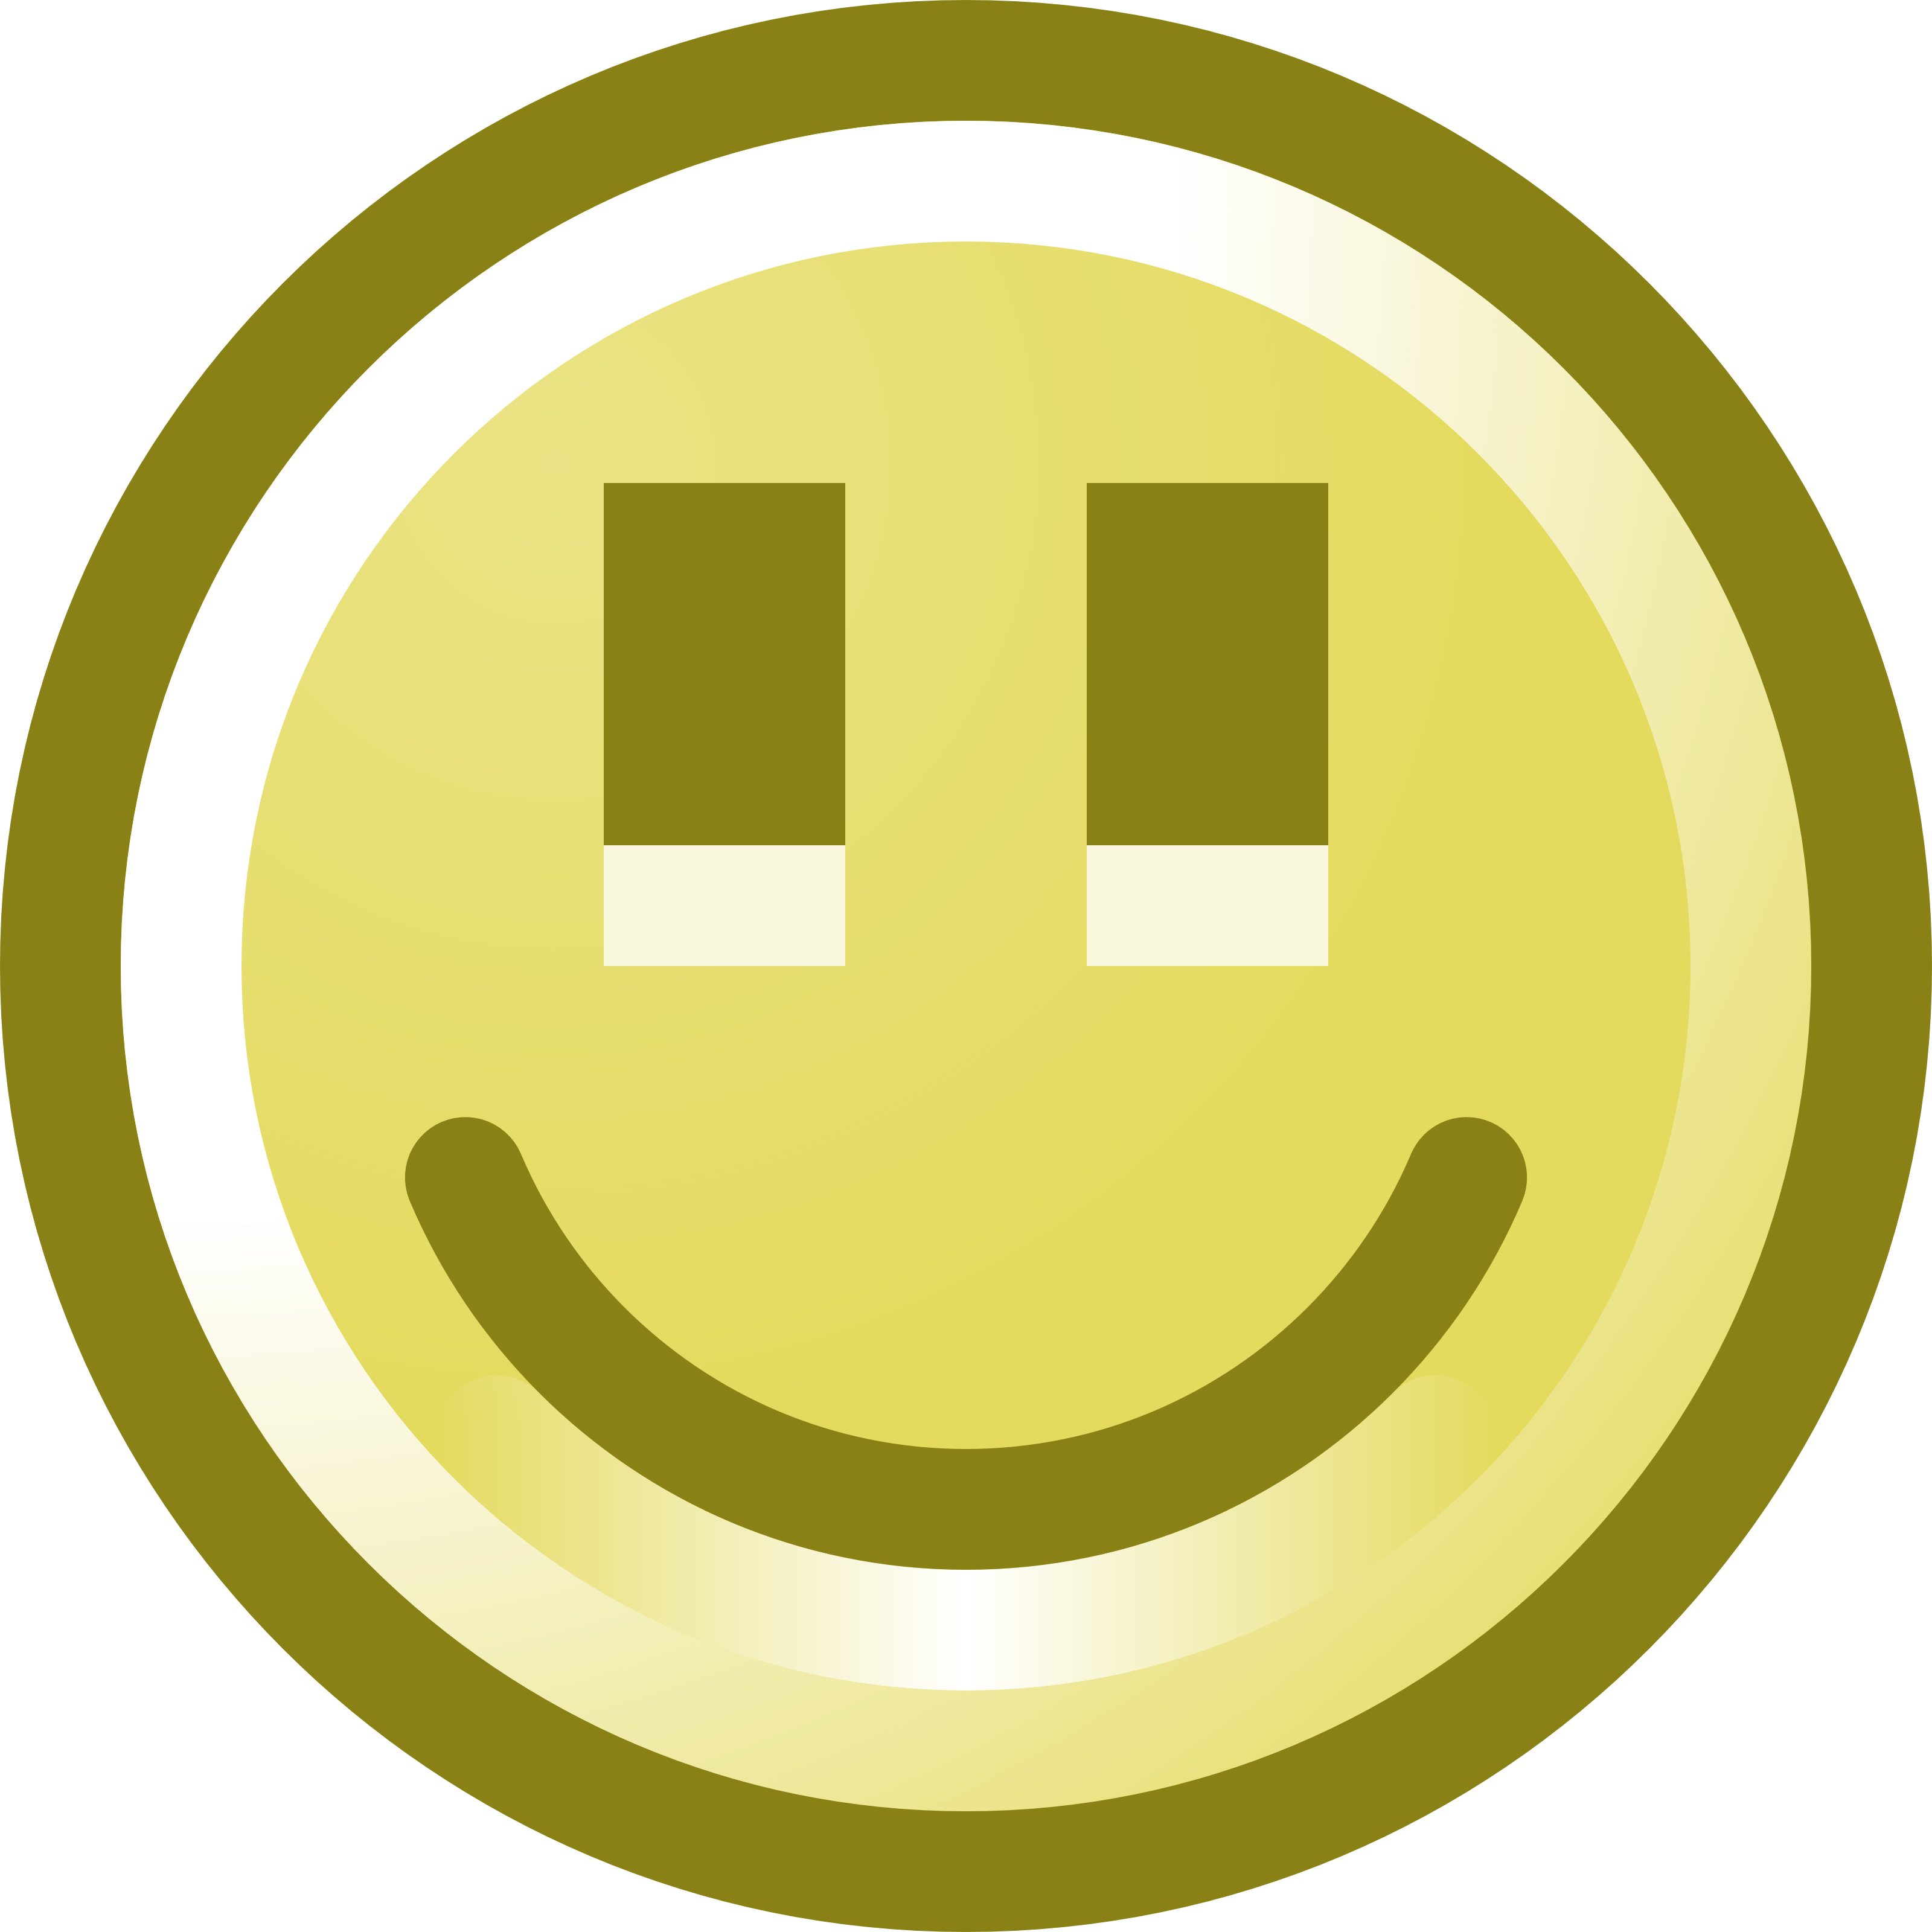 Smile Clip Art Free - Free Clipart Images